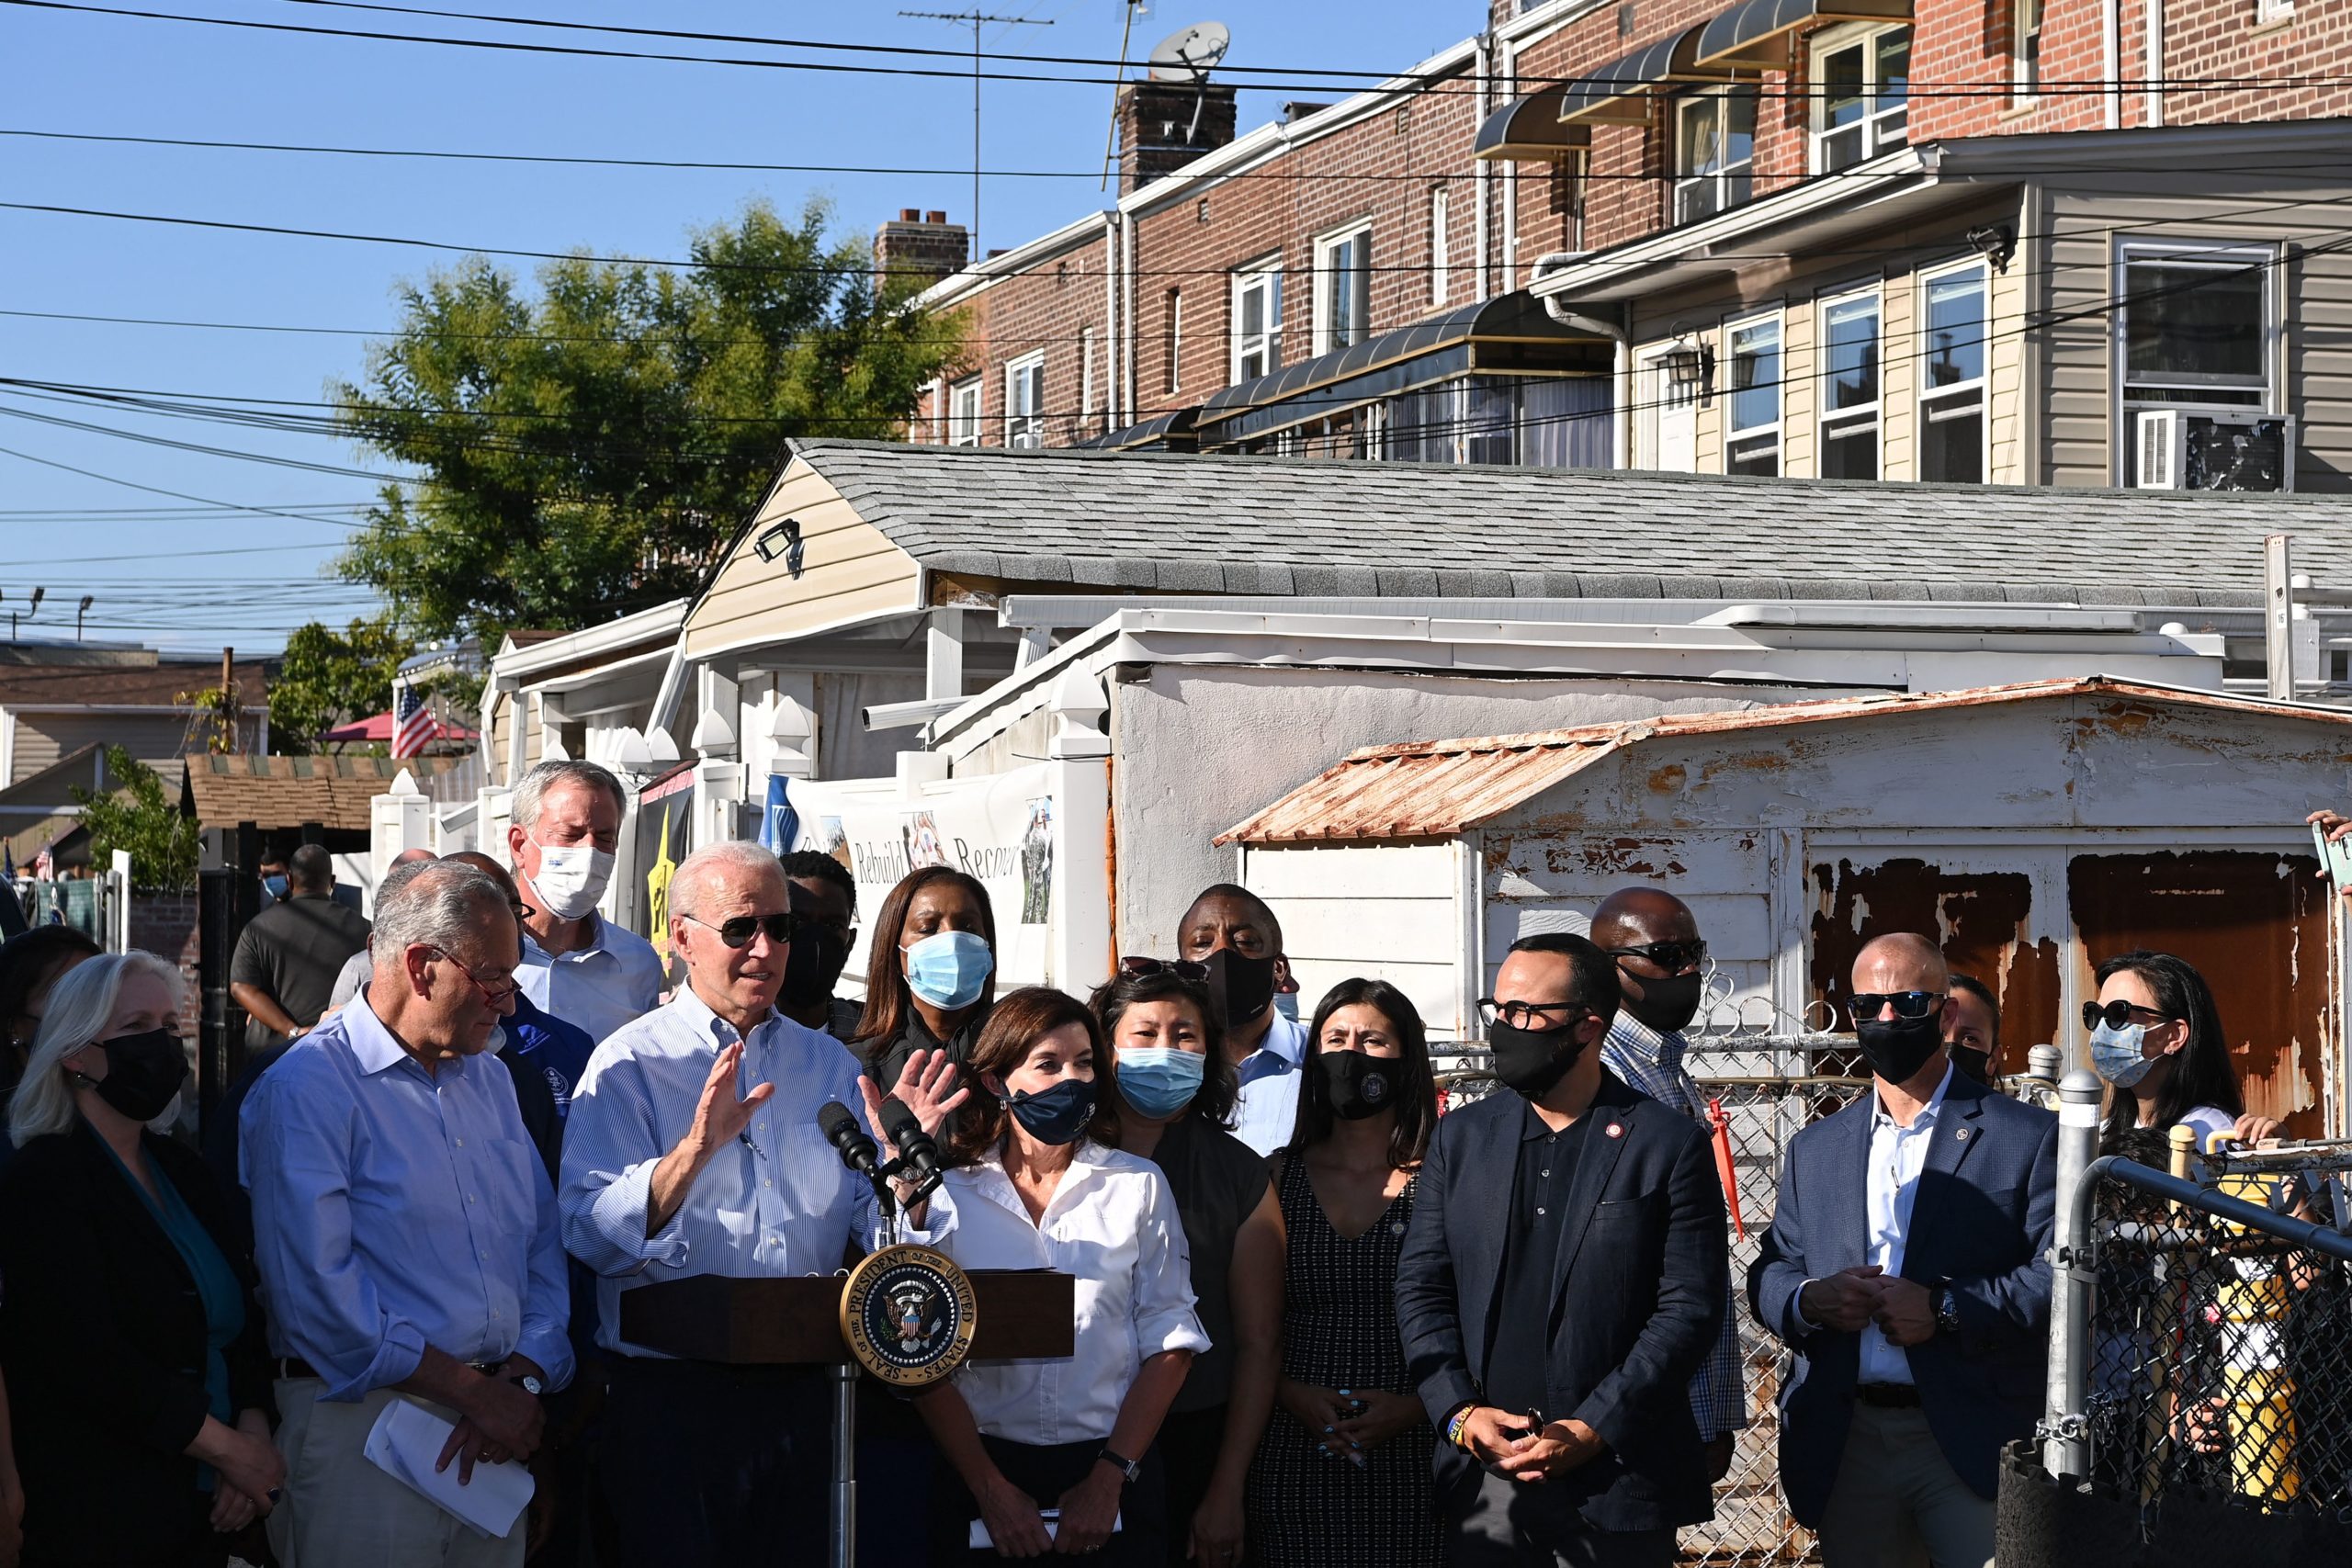 President Joe Biden speaks alongside other Democratic officials during a tour of a neighborhood affected by Hurricane Ida in Queens, New York on Sept. 7. (Mandel Ngan/AFP via Getty Images)